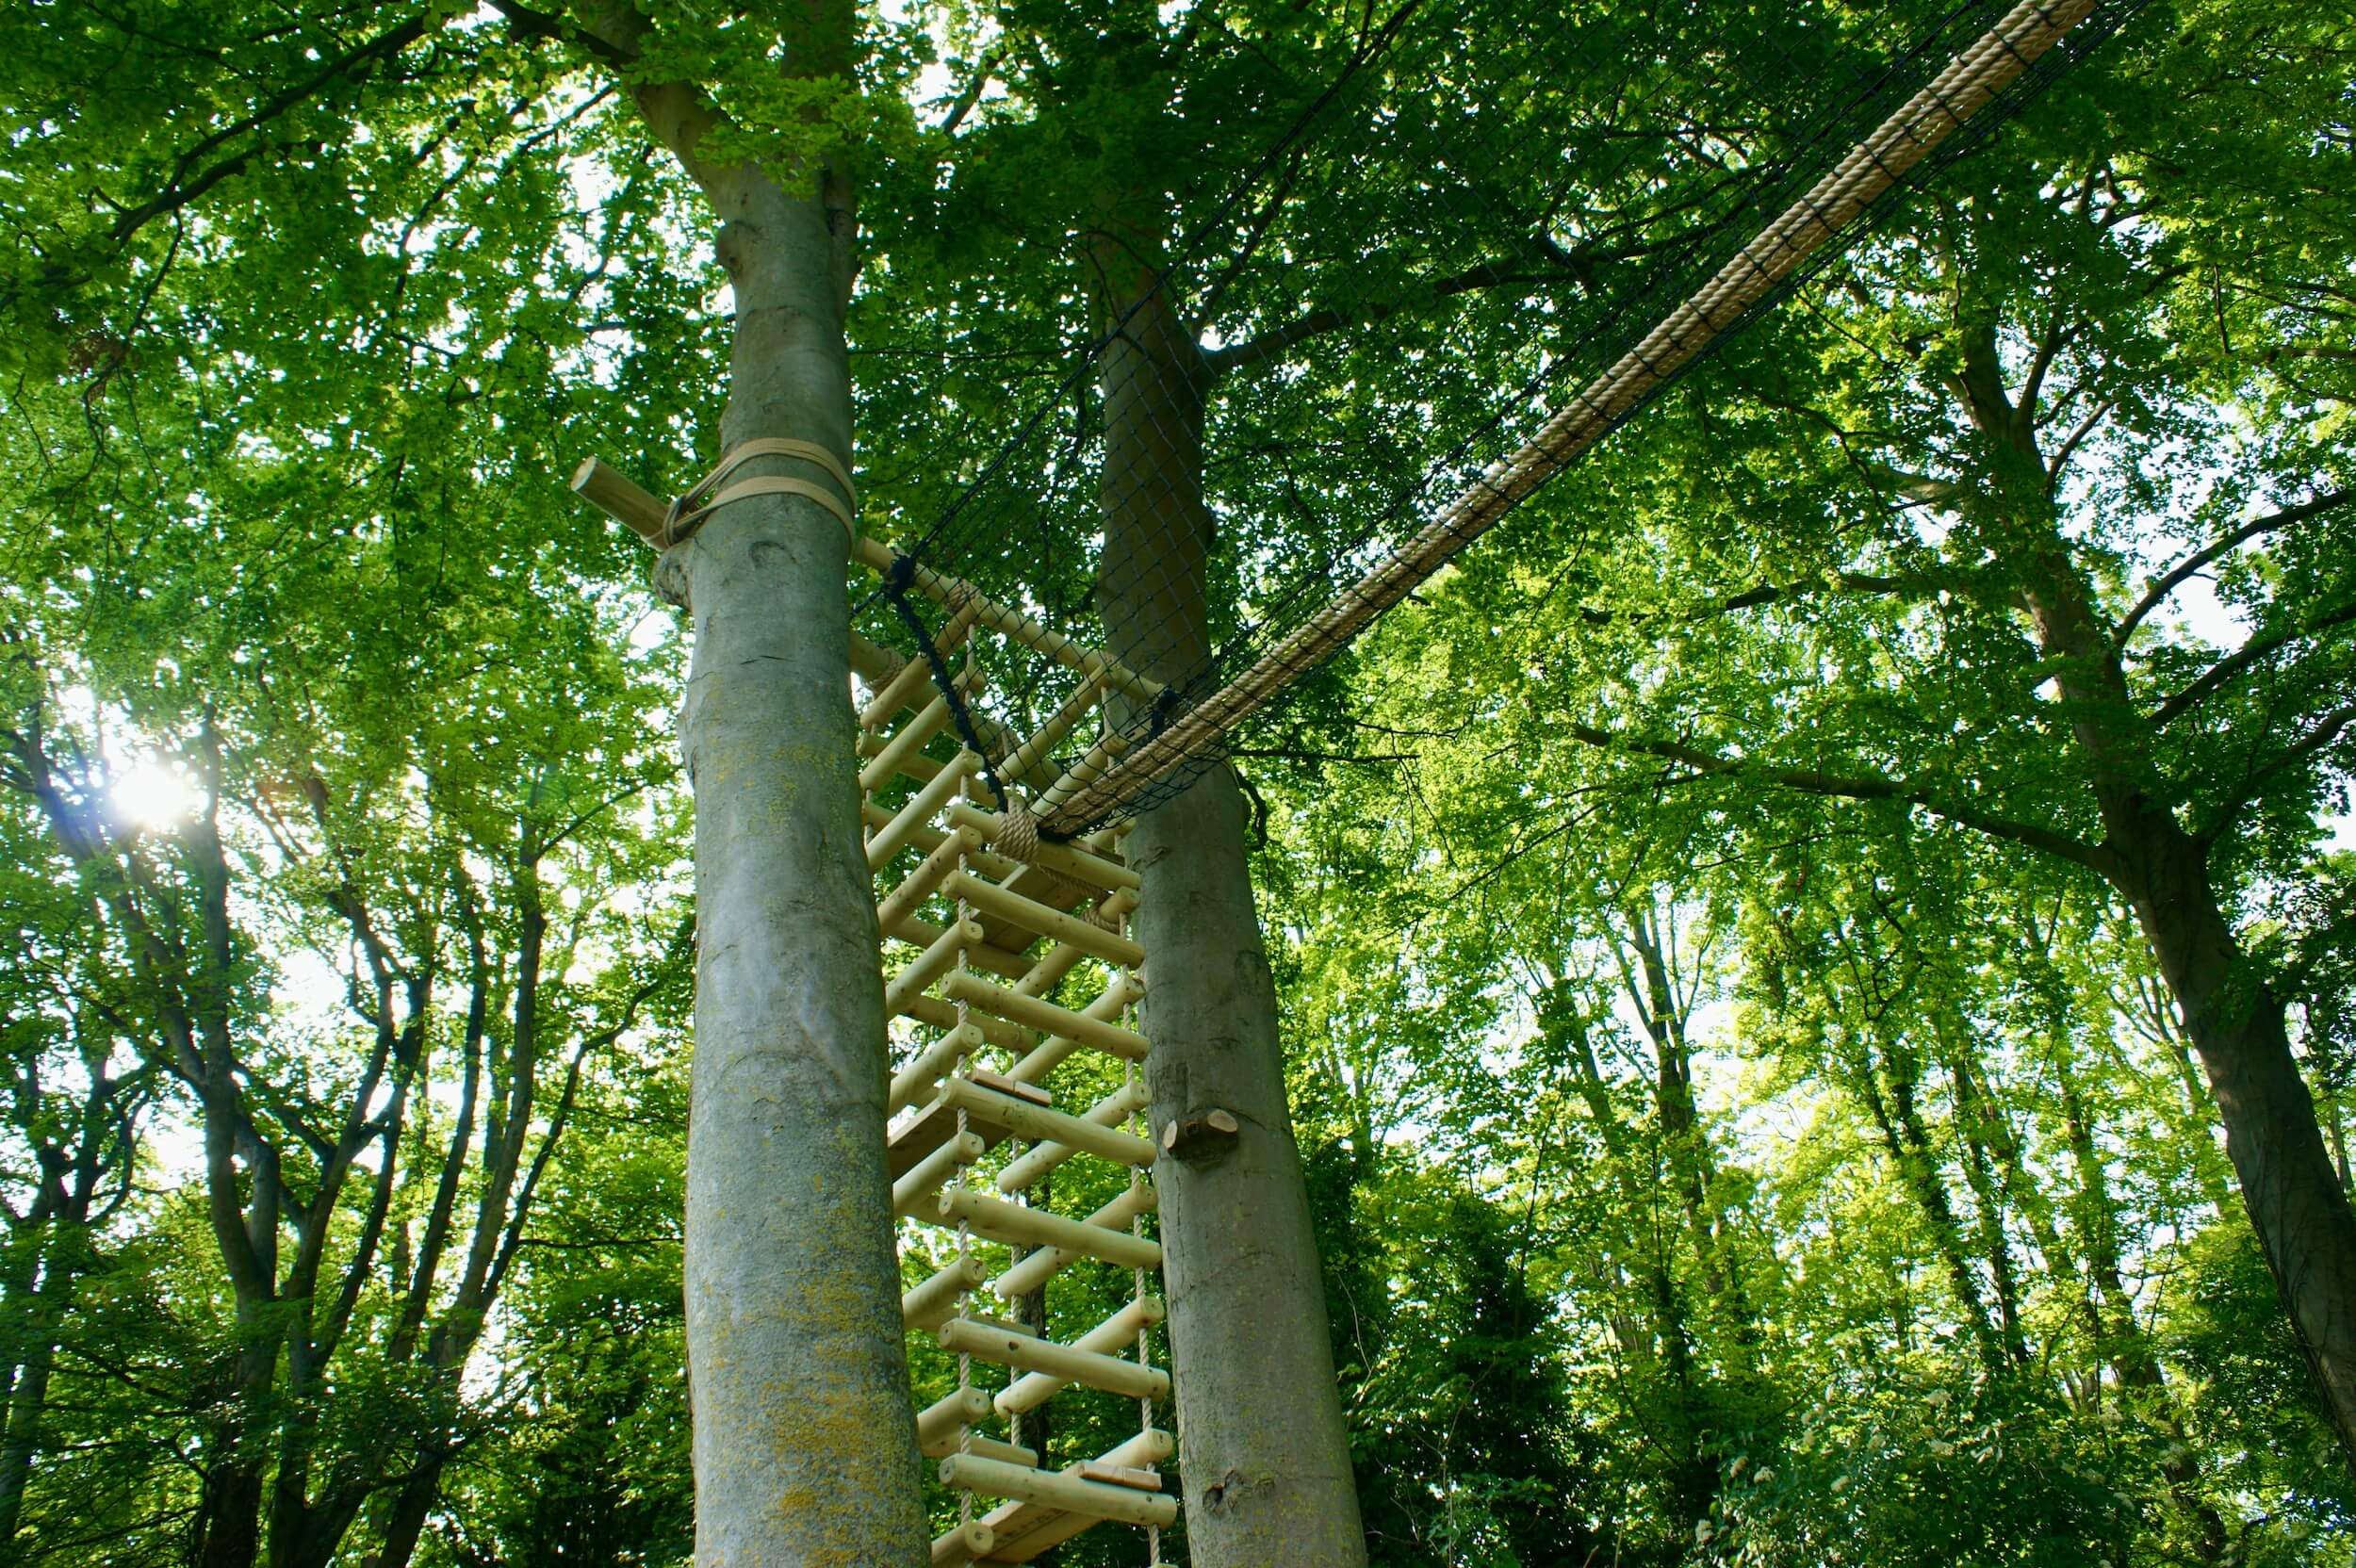 Bespoke Rope Ladders for Treehouses, Tree-Decks and Platforms